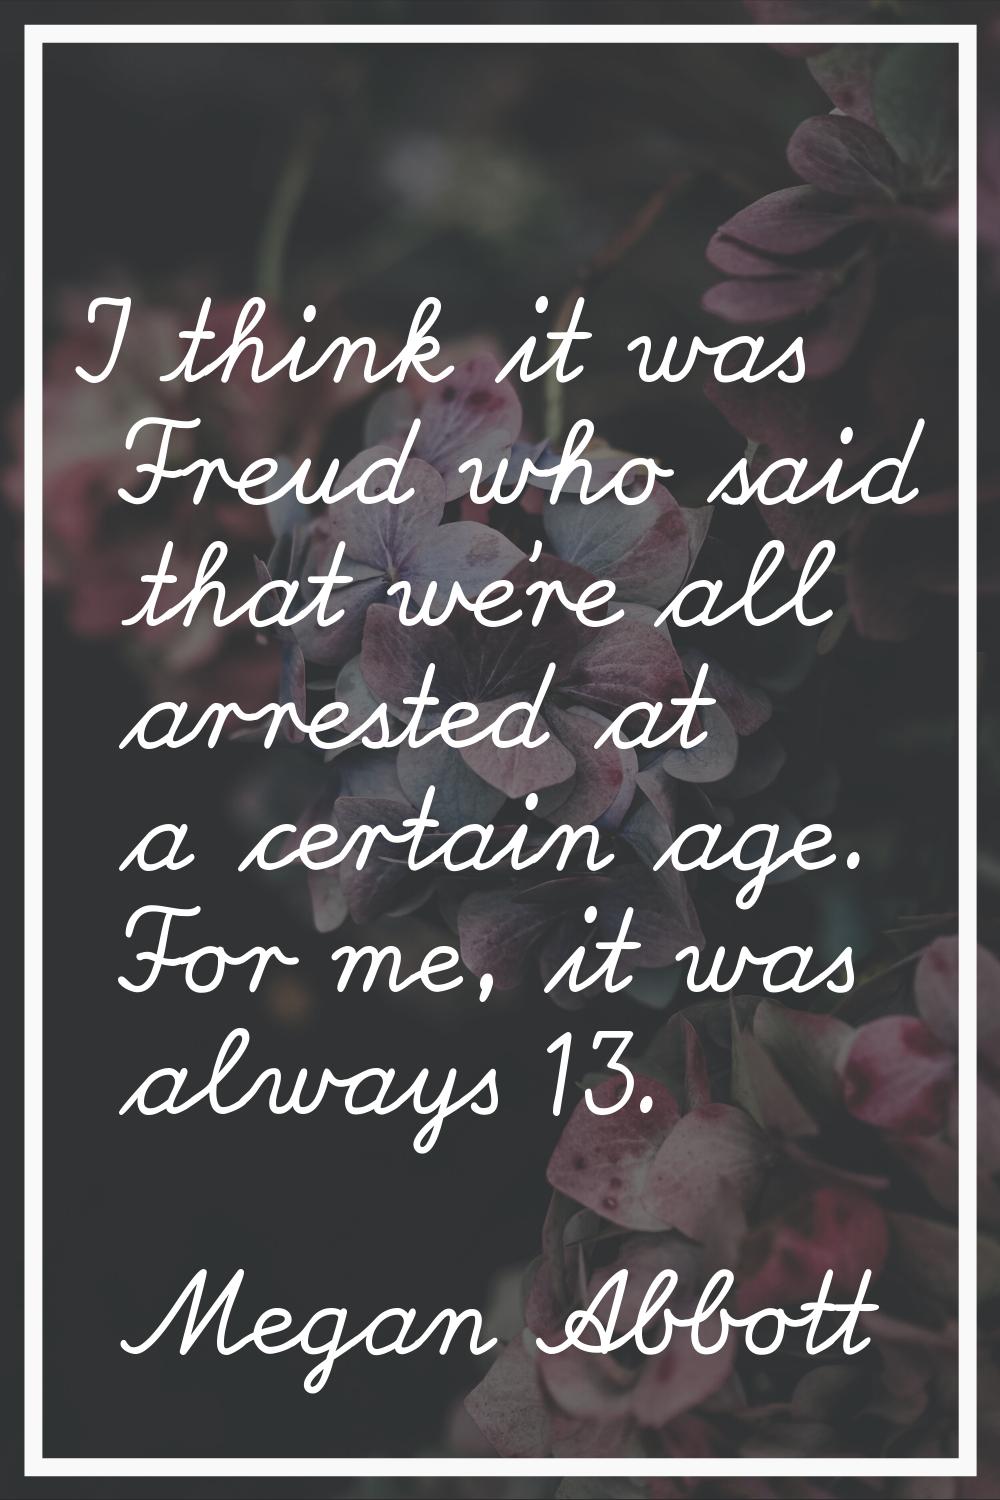 I think it was Freud who said that we're all arrested at a certain age. For me, it was always 13.